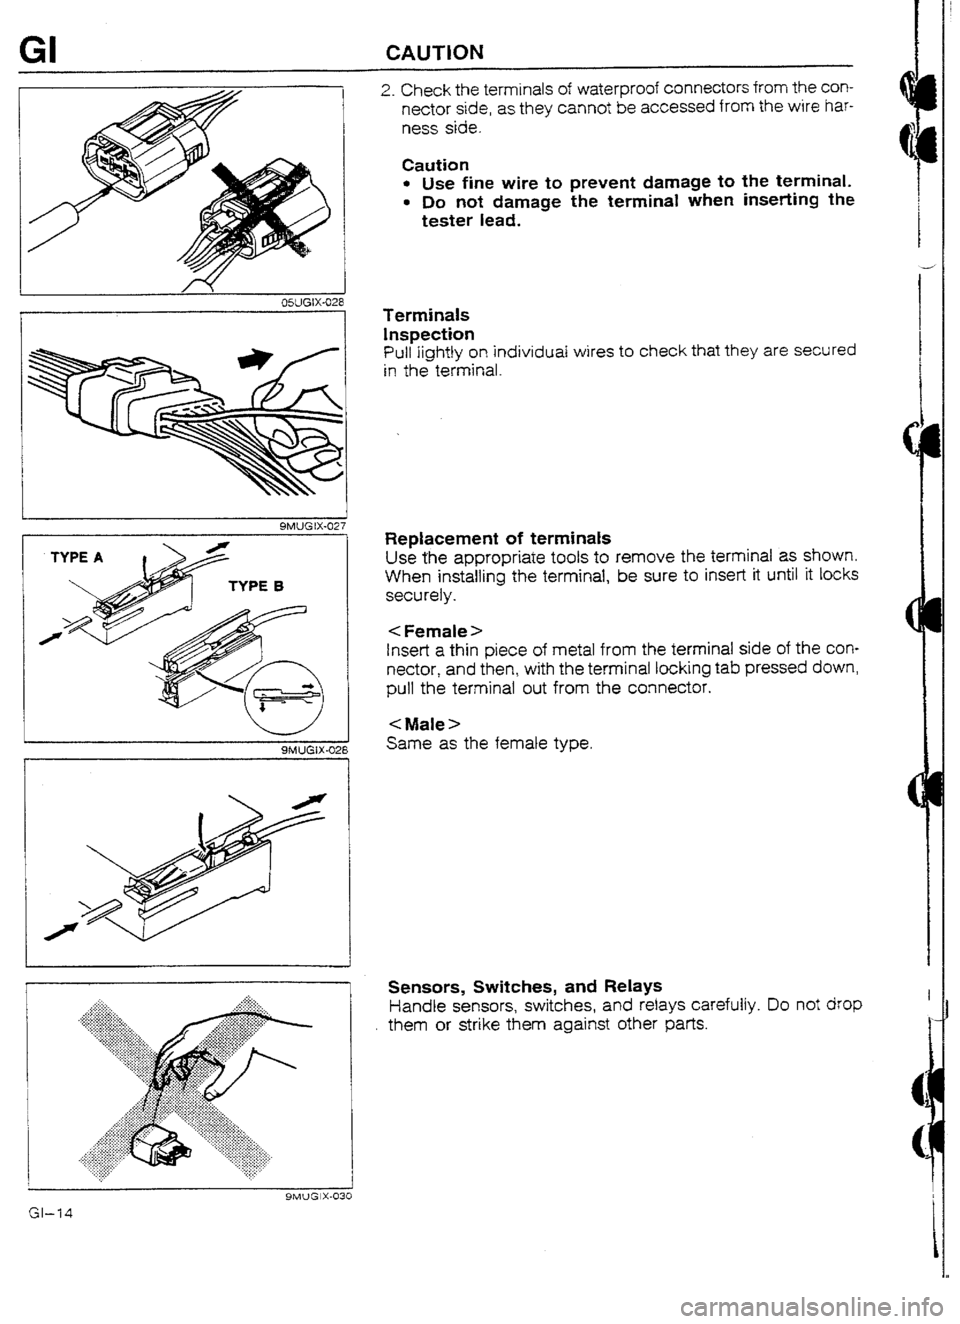 MAZDA 232 1990  Workshop Manual Suplement I OWGIX-028 
1 SMUG IX-027 
gMi)GlX-03 
GI-i4 
2. Check the terminals of waterproof connectors from the con- 
nector side, as they cannot be accessed from the wire har- 
ness side. 
Caution l 
Use fin